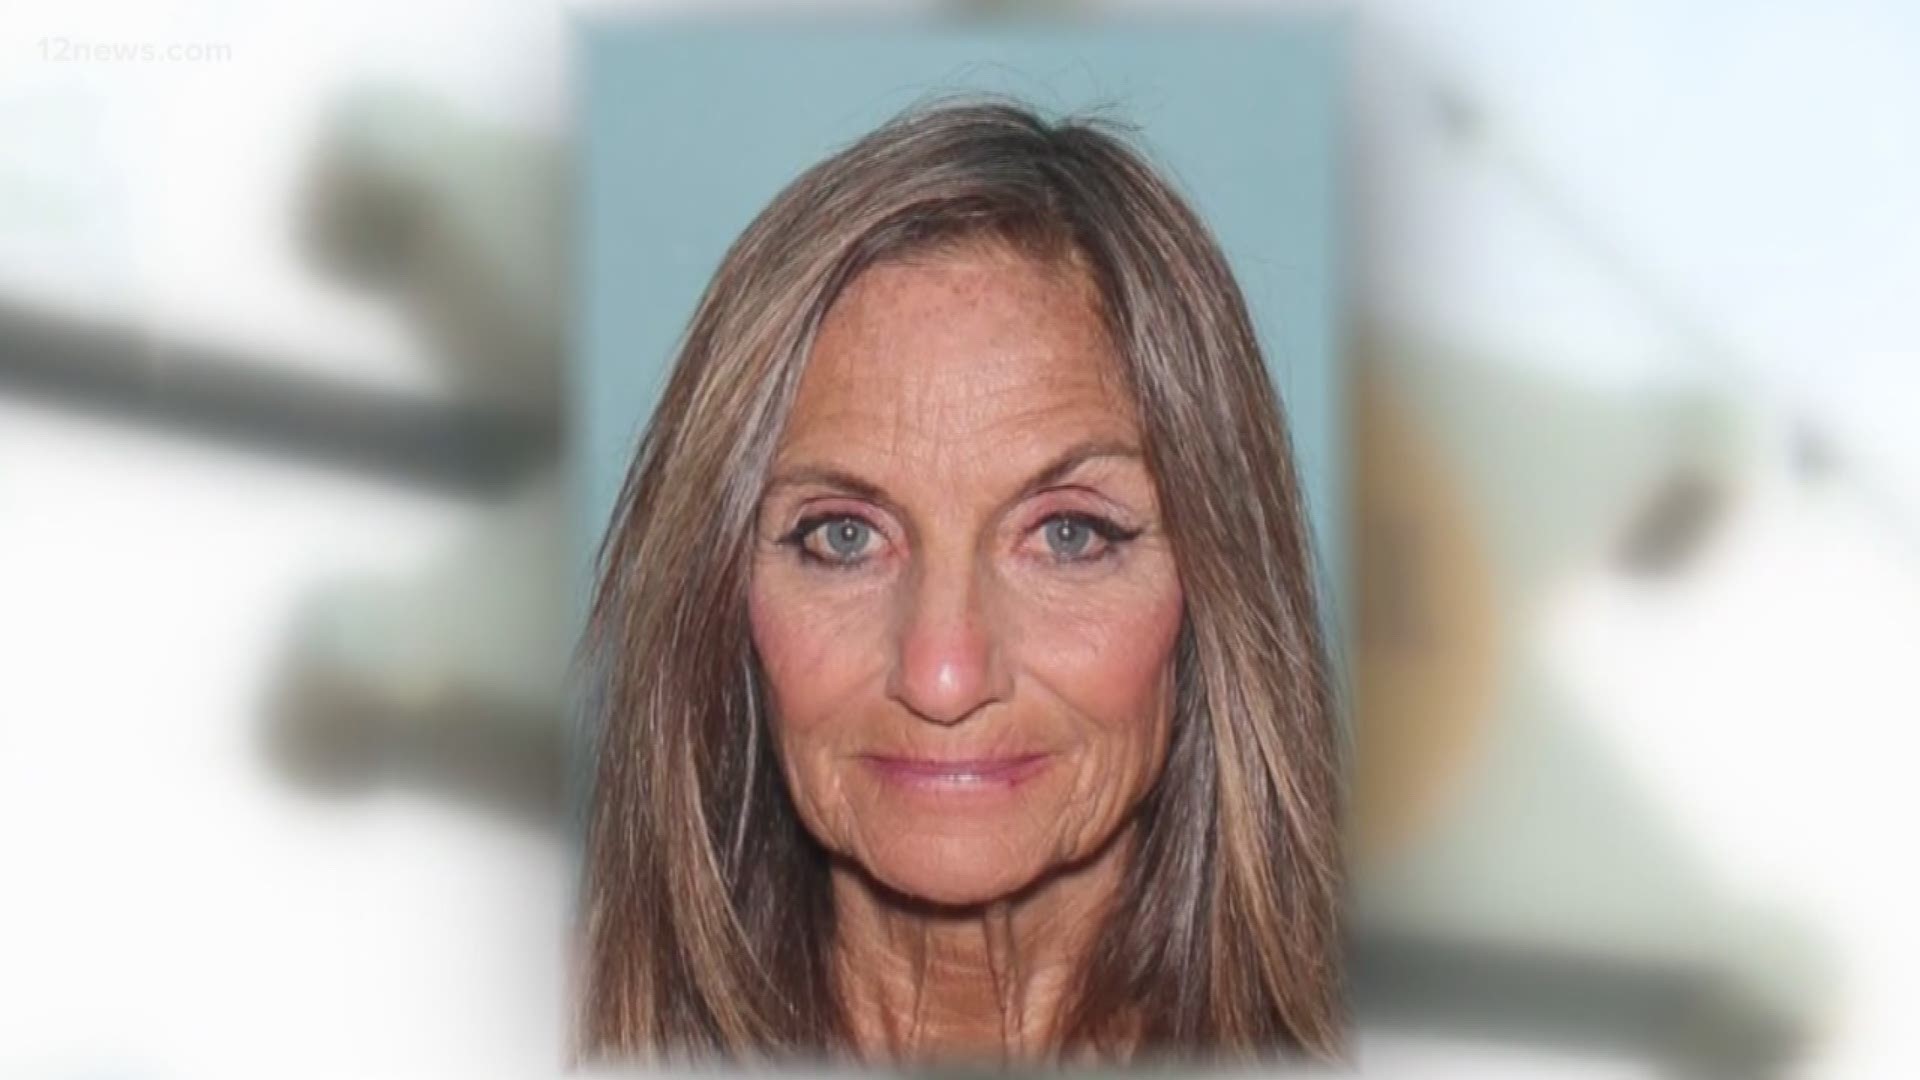 Paulette Larwinski was sexually assaulted and murdered by a 22-year-old. She frequented the area of Old Town Scottsdale, and friends there are planning a vigil to honor her memory.